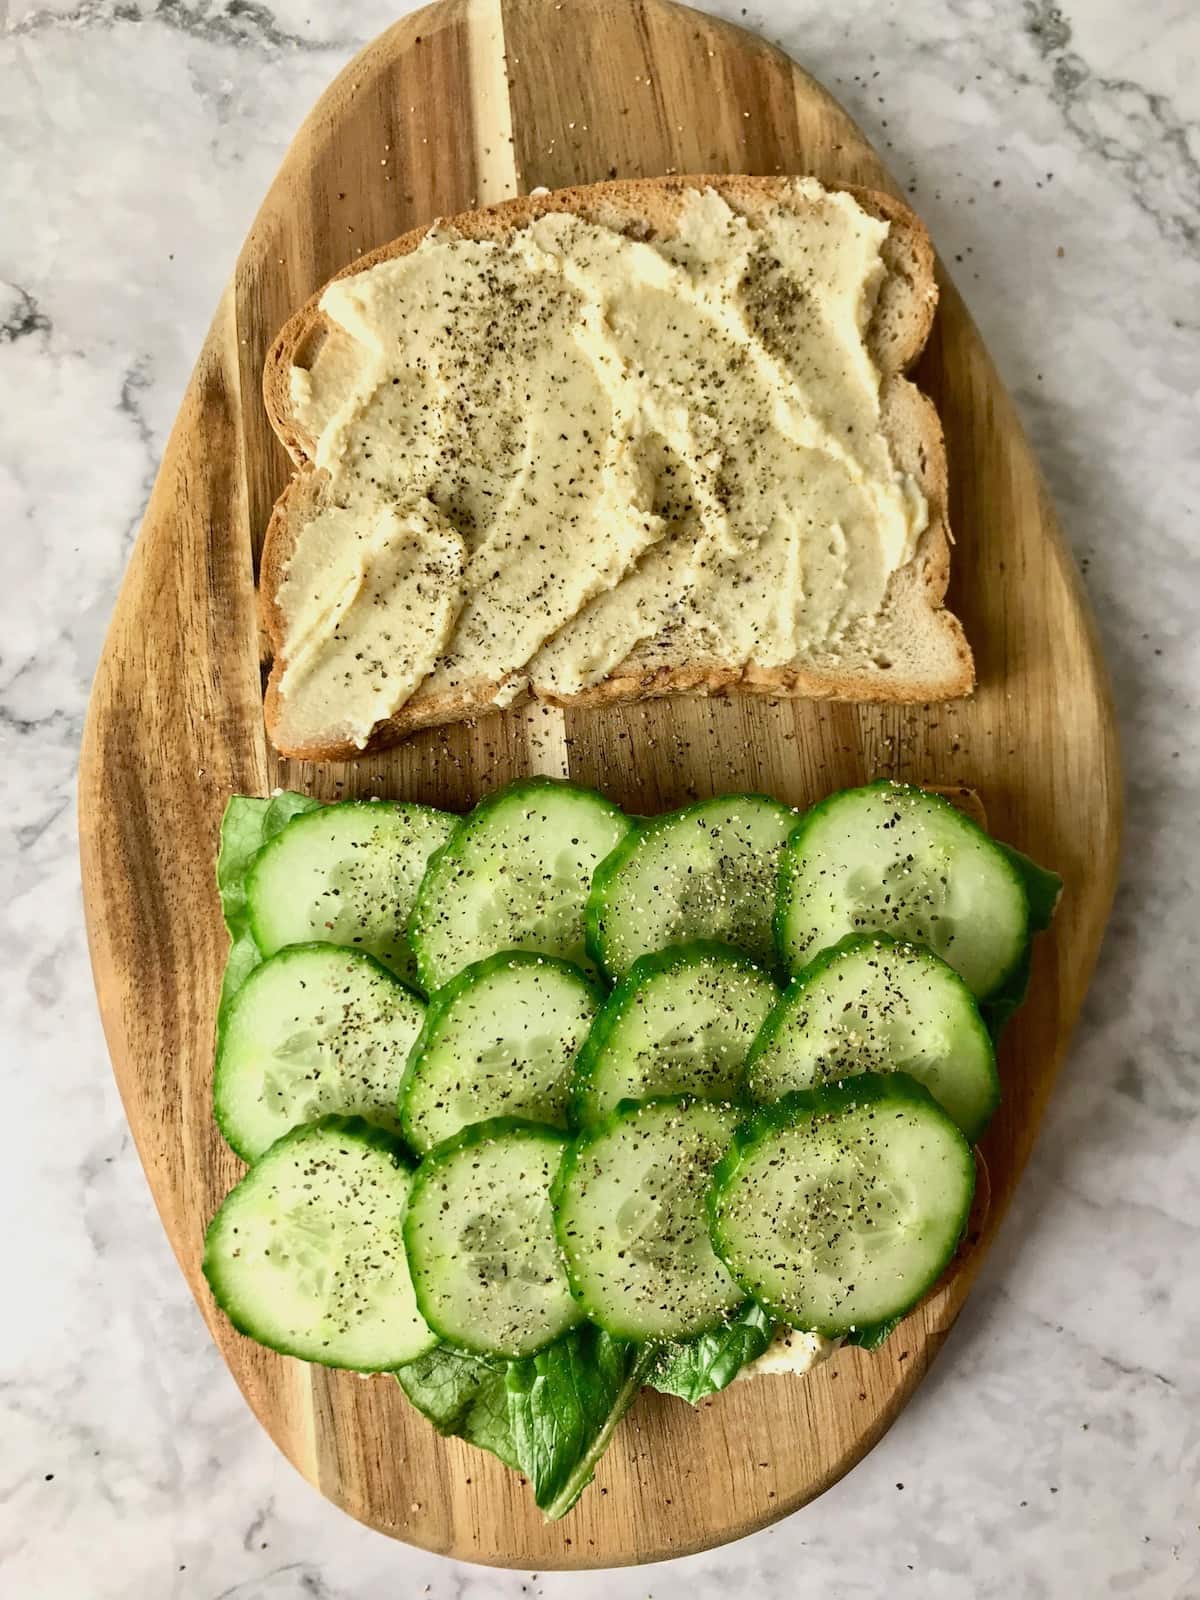 Two slices of bread, one with hummus, one with sliced cucumbers topped with black pepper.